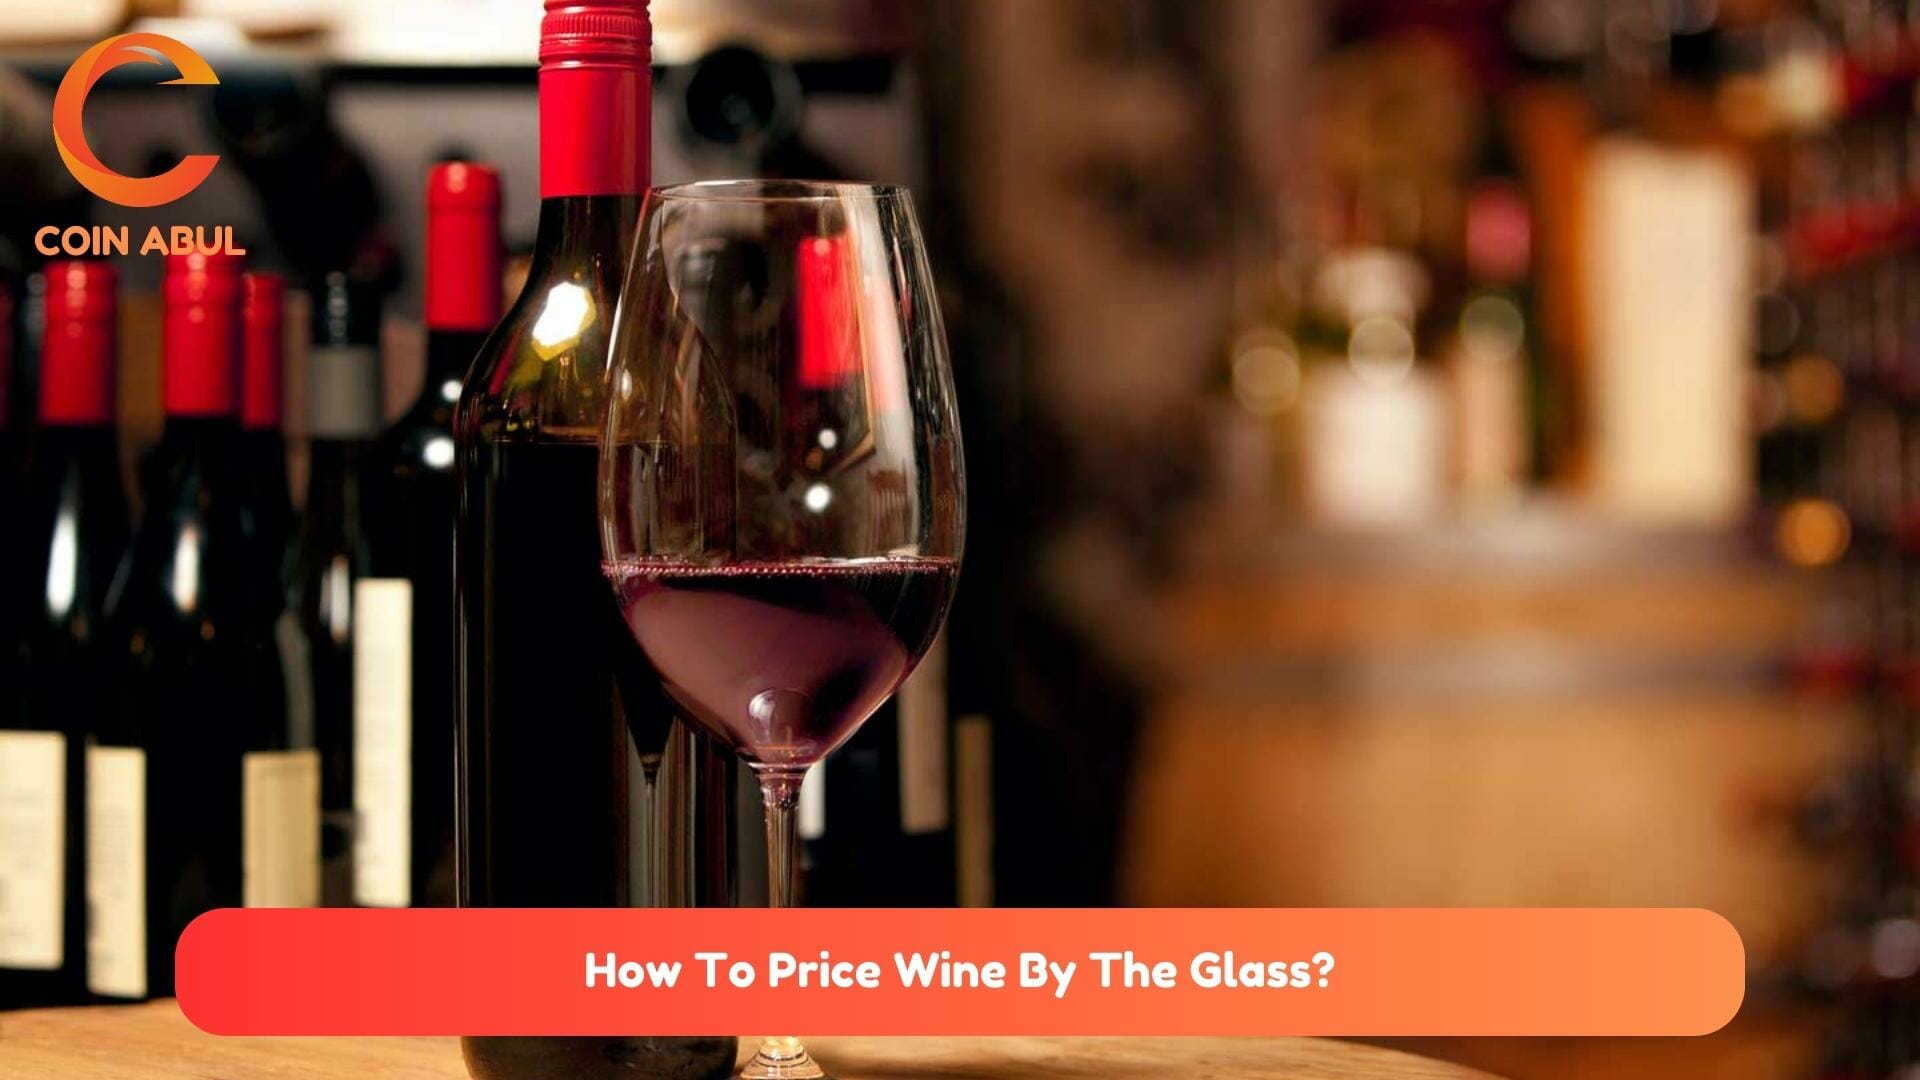 How To Price Wine By The Glass